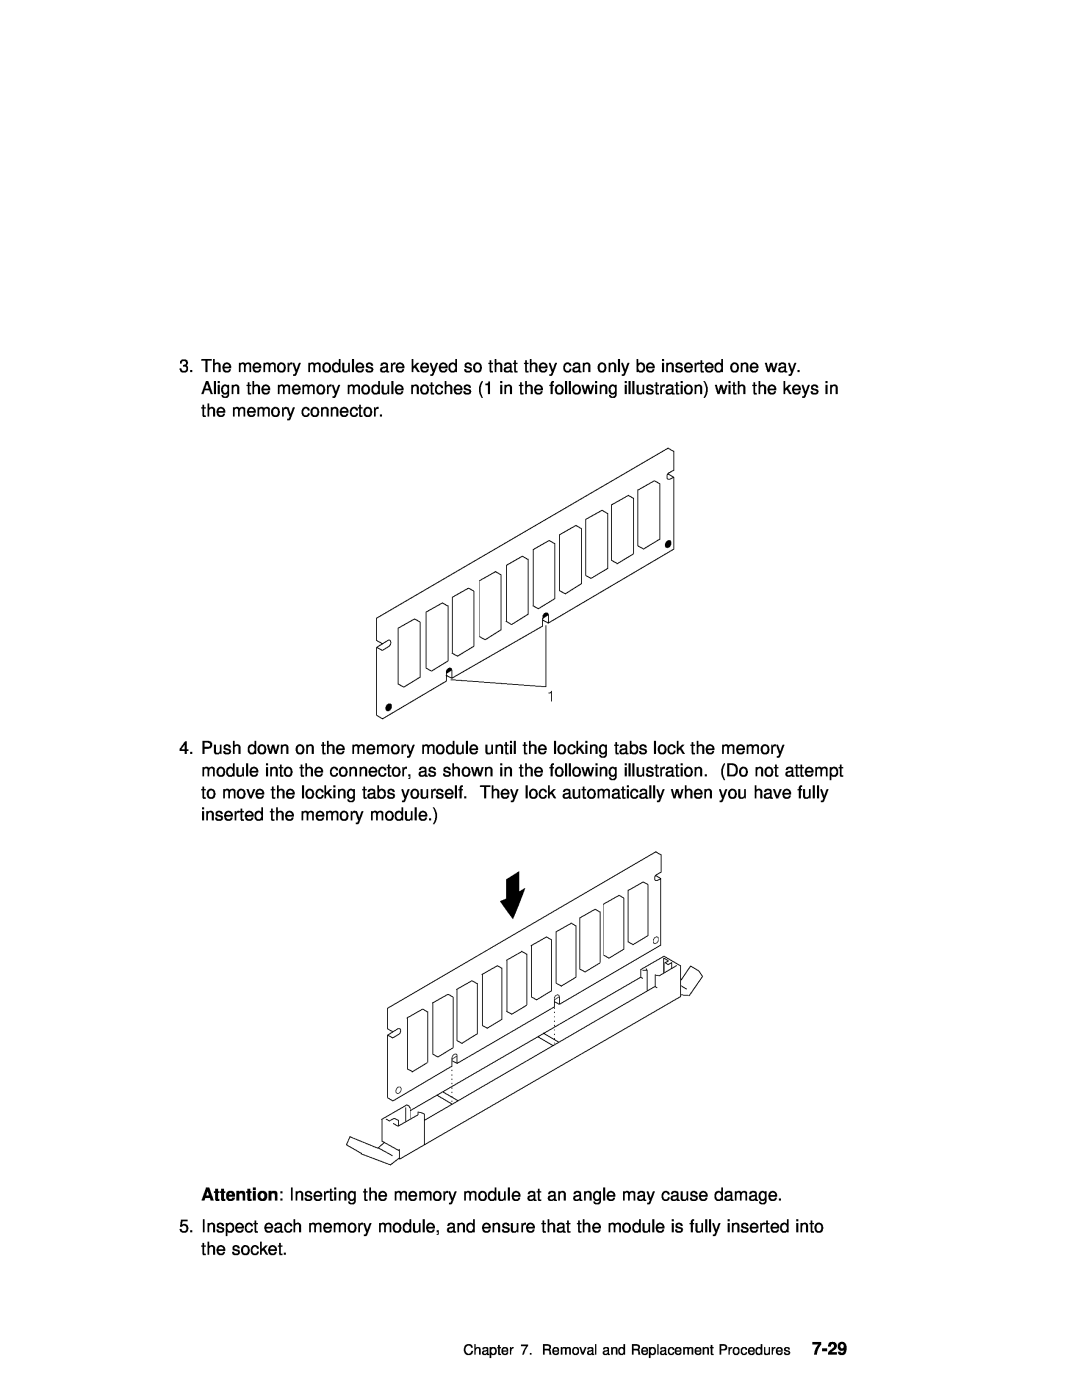 IBM B50 manual 7-29, Attention Inserting the memory module at an angle may cause damage 